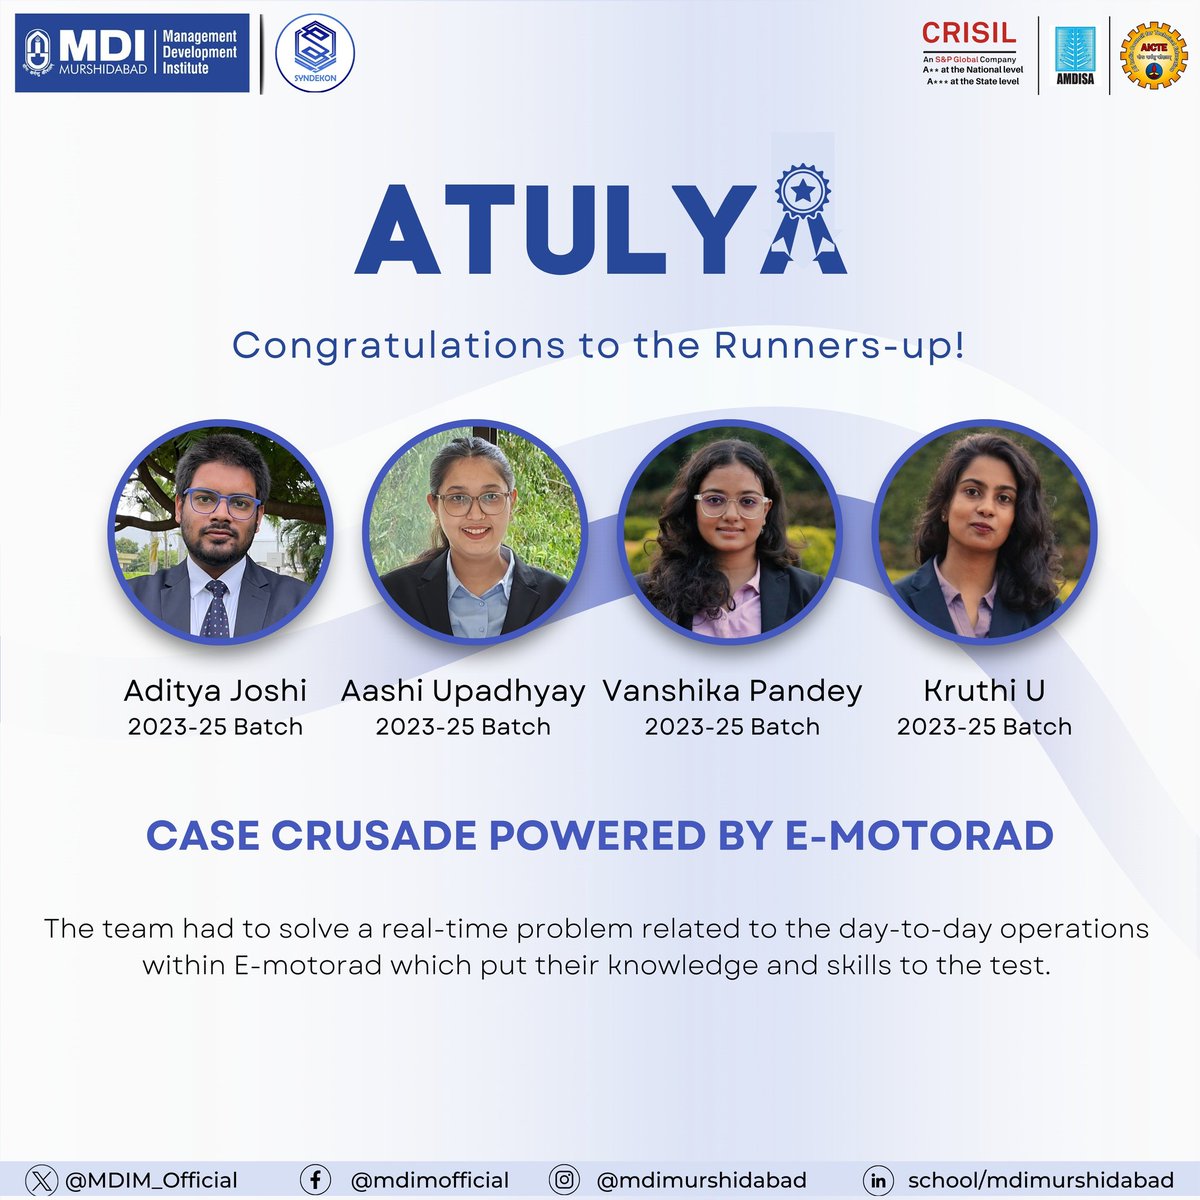 #MDIM proudly announces that Aditya Joshi, Aashi Upadhyay, Vanshika Pandey & Kruthi U of the 2023-25 batch have secured the #Runnersup position in #CaseCrusade, a #Competition conducted by the Markrone, the #Marketing club of MDIM in collaboration with E-motorad. #MDI #MBA